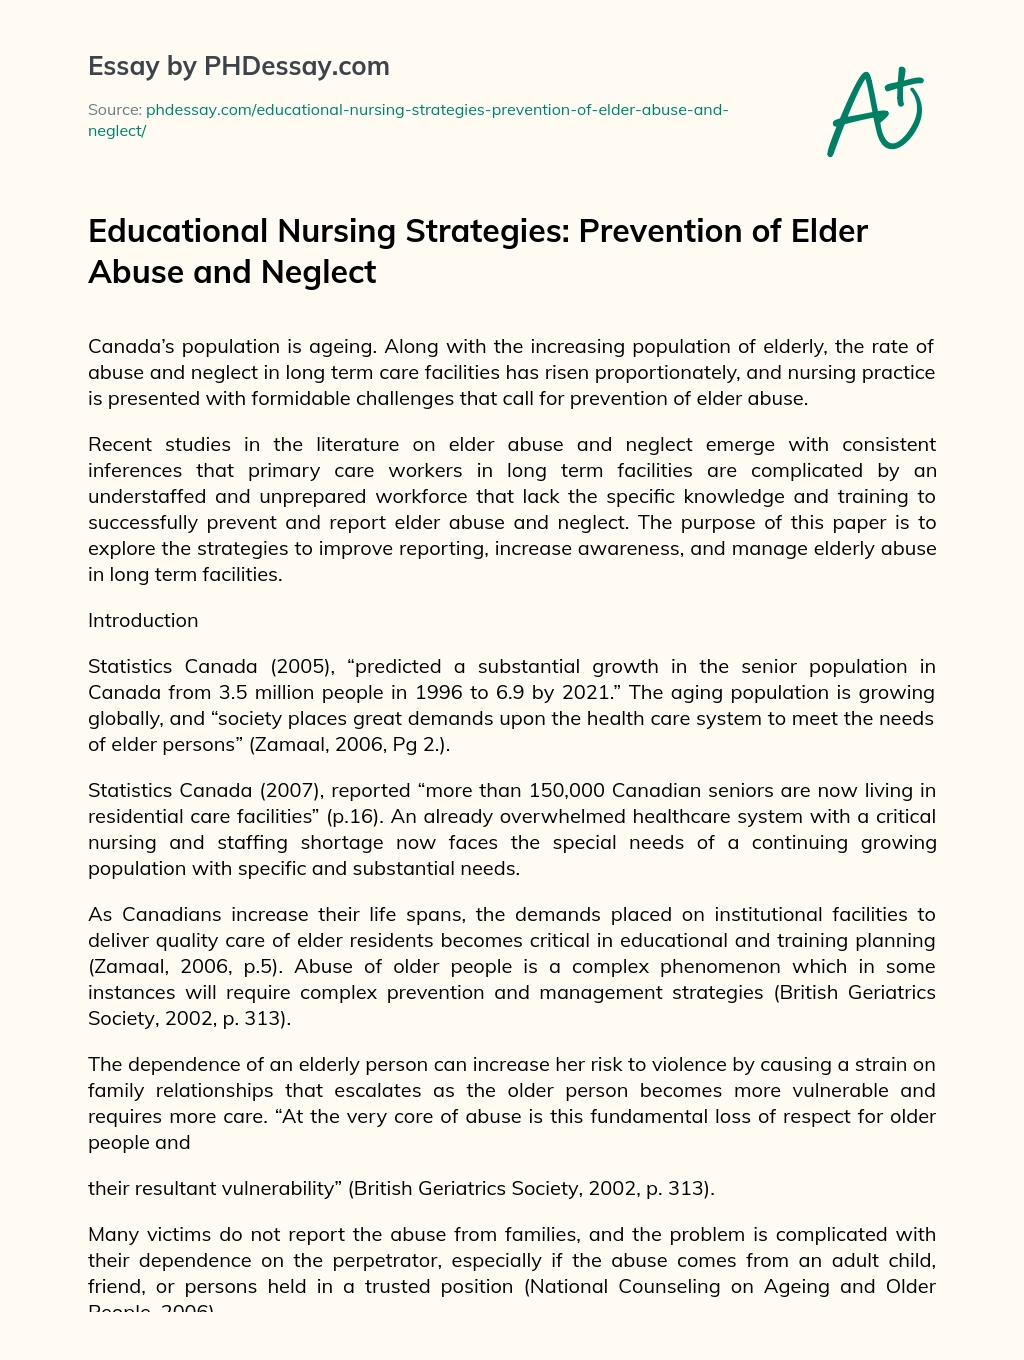 Educational Nursing Strategies: Prevention of Elder Abuse and Neglect essay